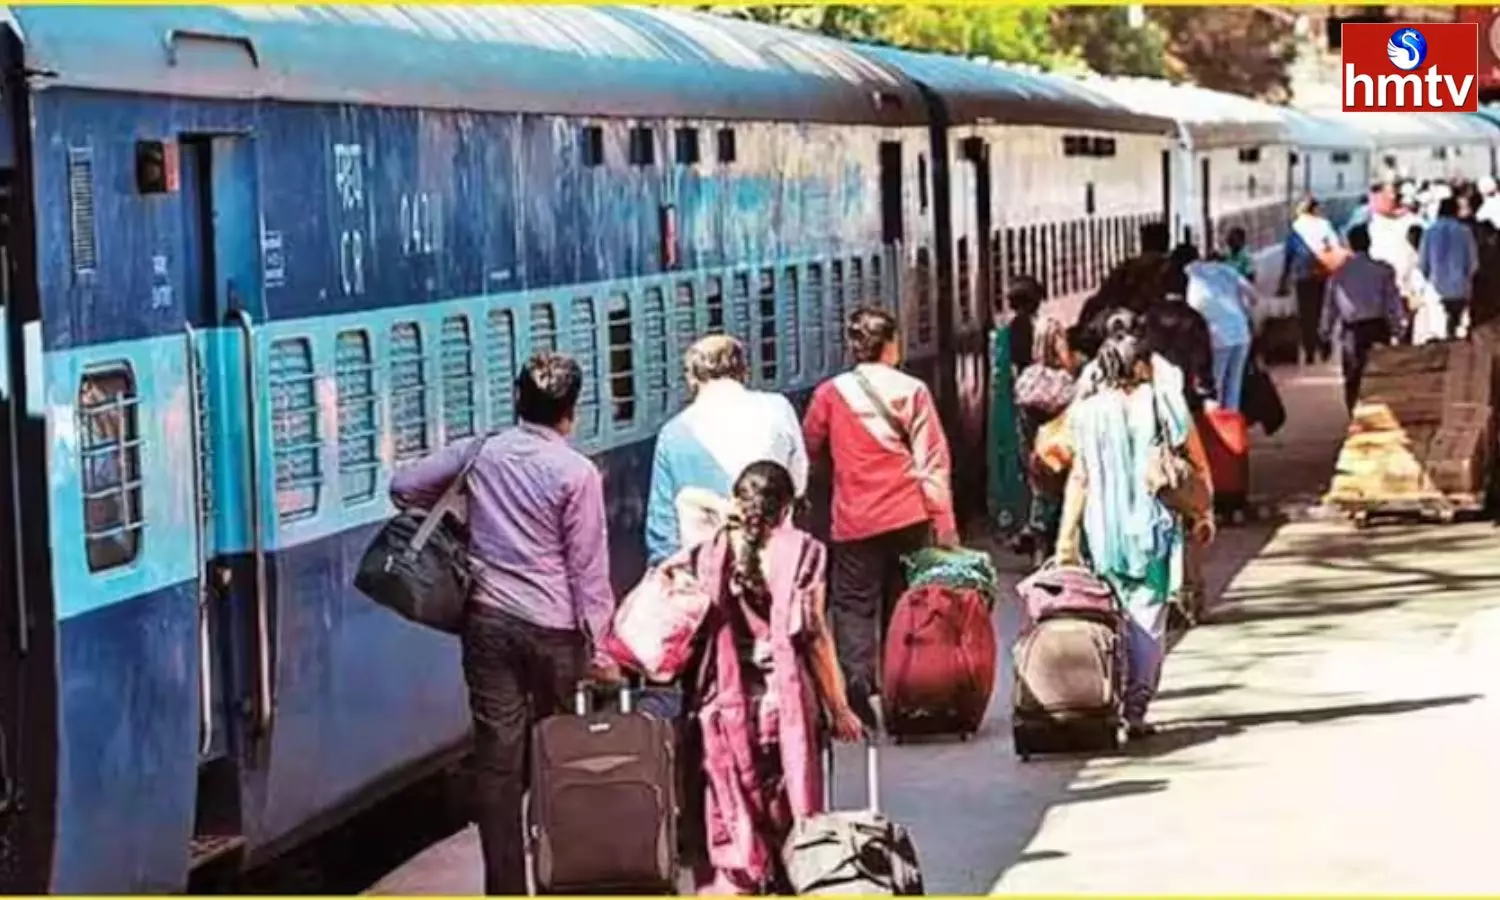 Indian Railways has released new rules regarding train ticket booking This will benefit the passengers family members can travel on your ticket